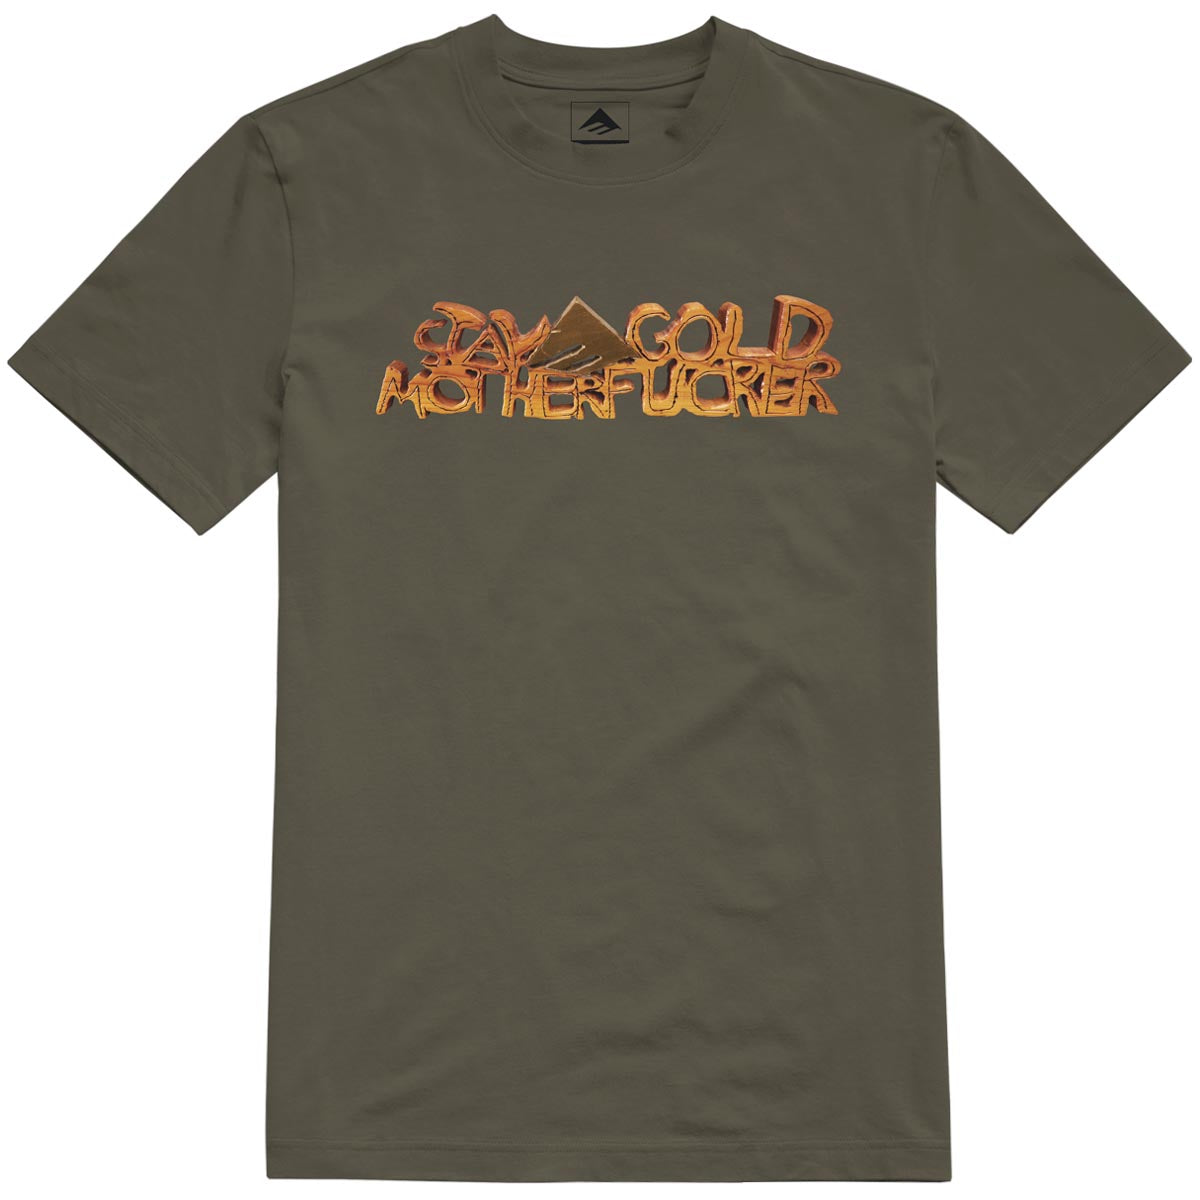 Emerica Sgmf T-Shirt - Olive image 1